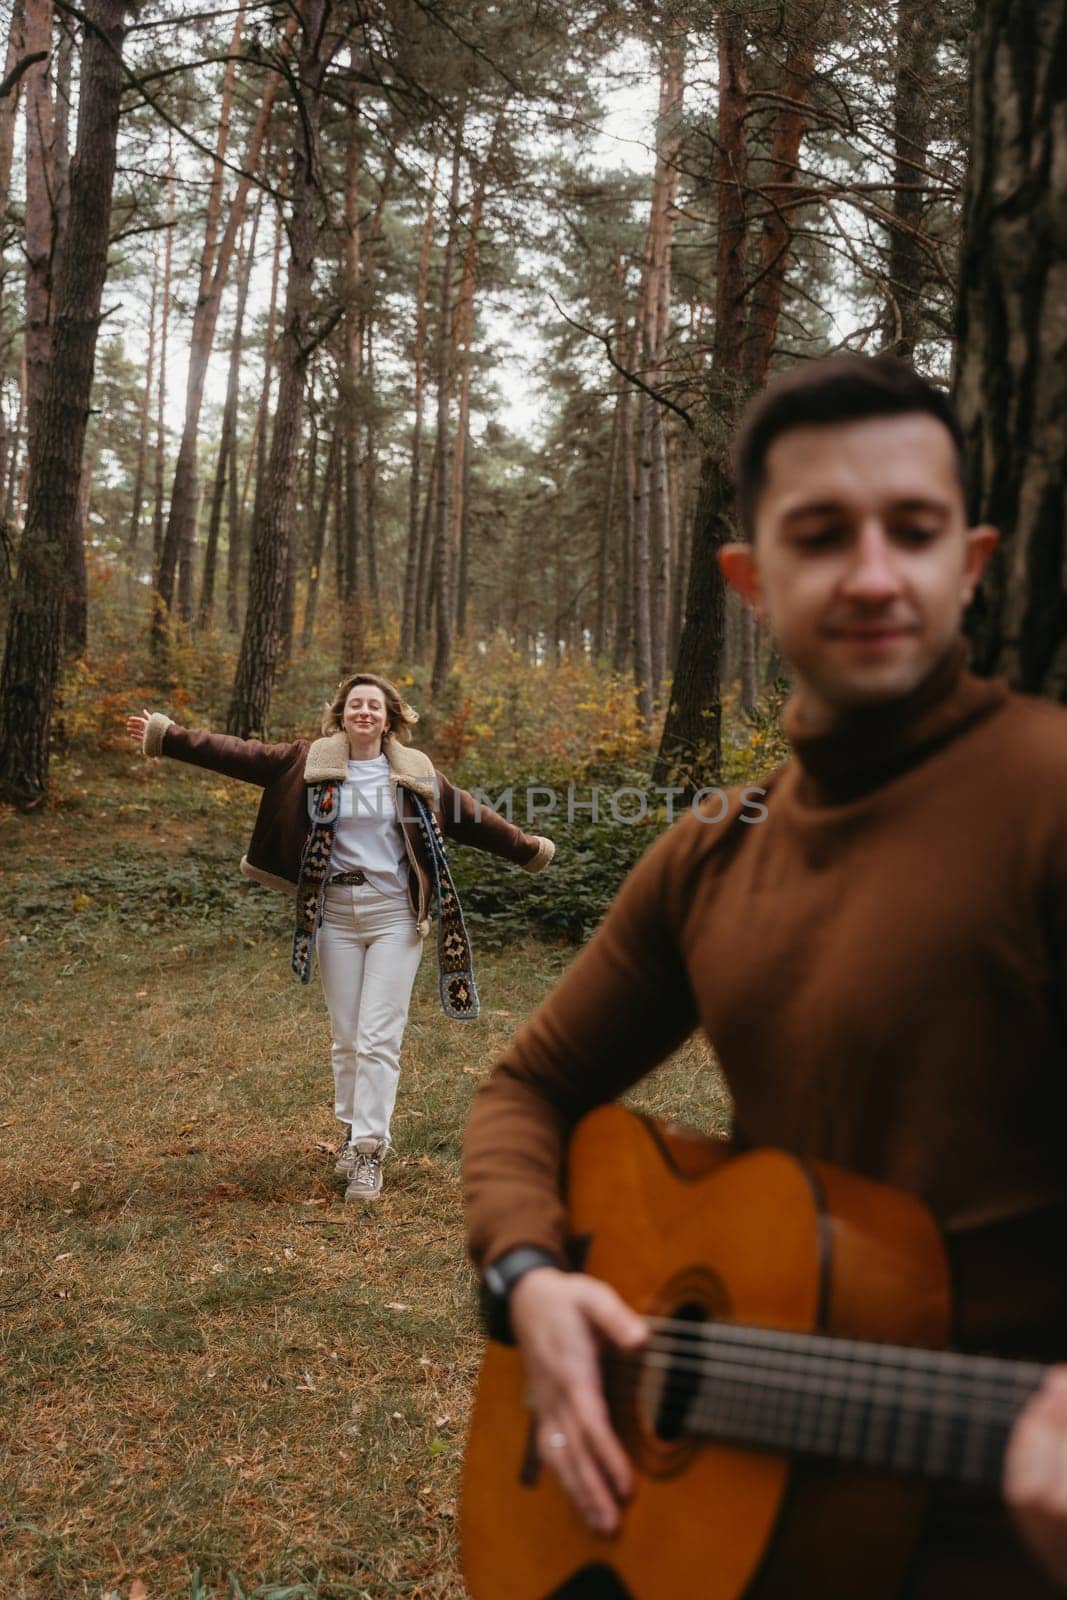 Man playing guitar outdoors in woods, a woman dancing behind him in the autumn park